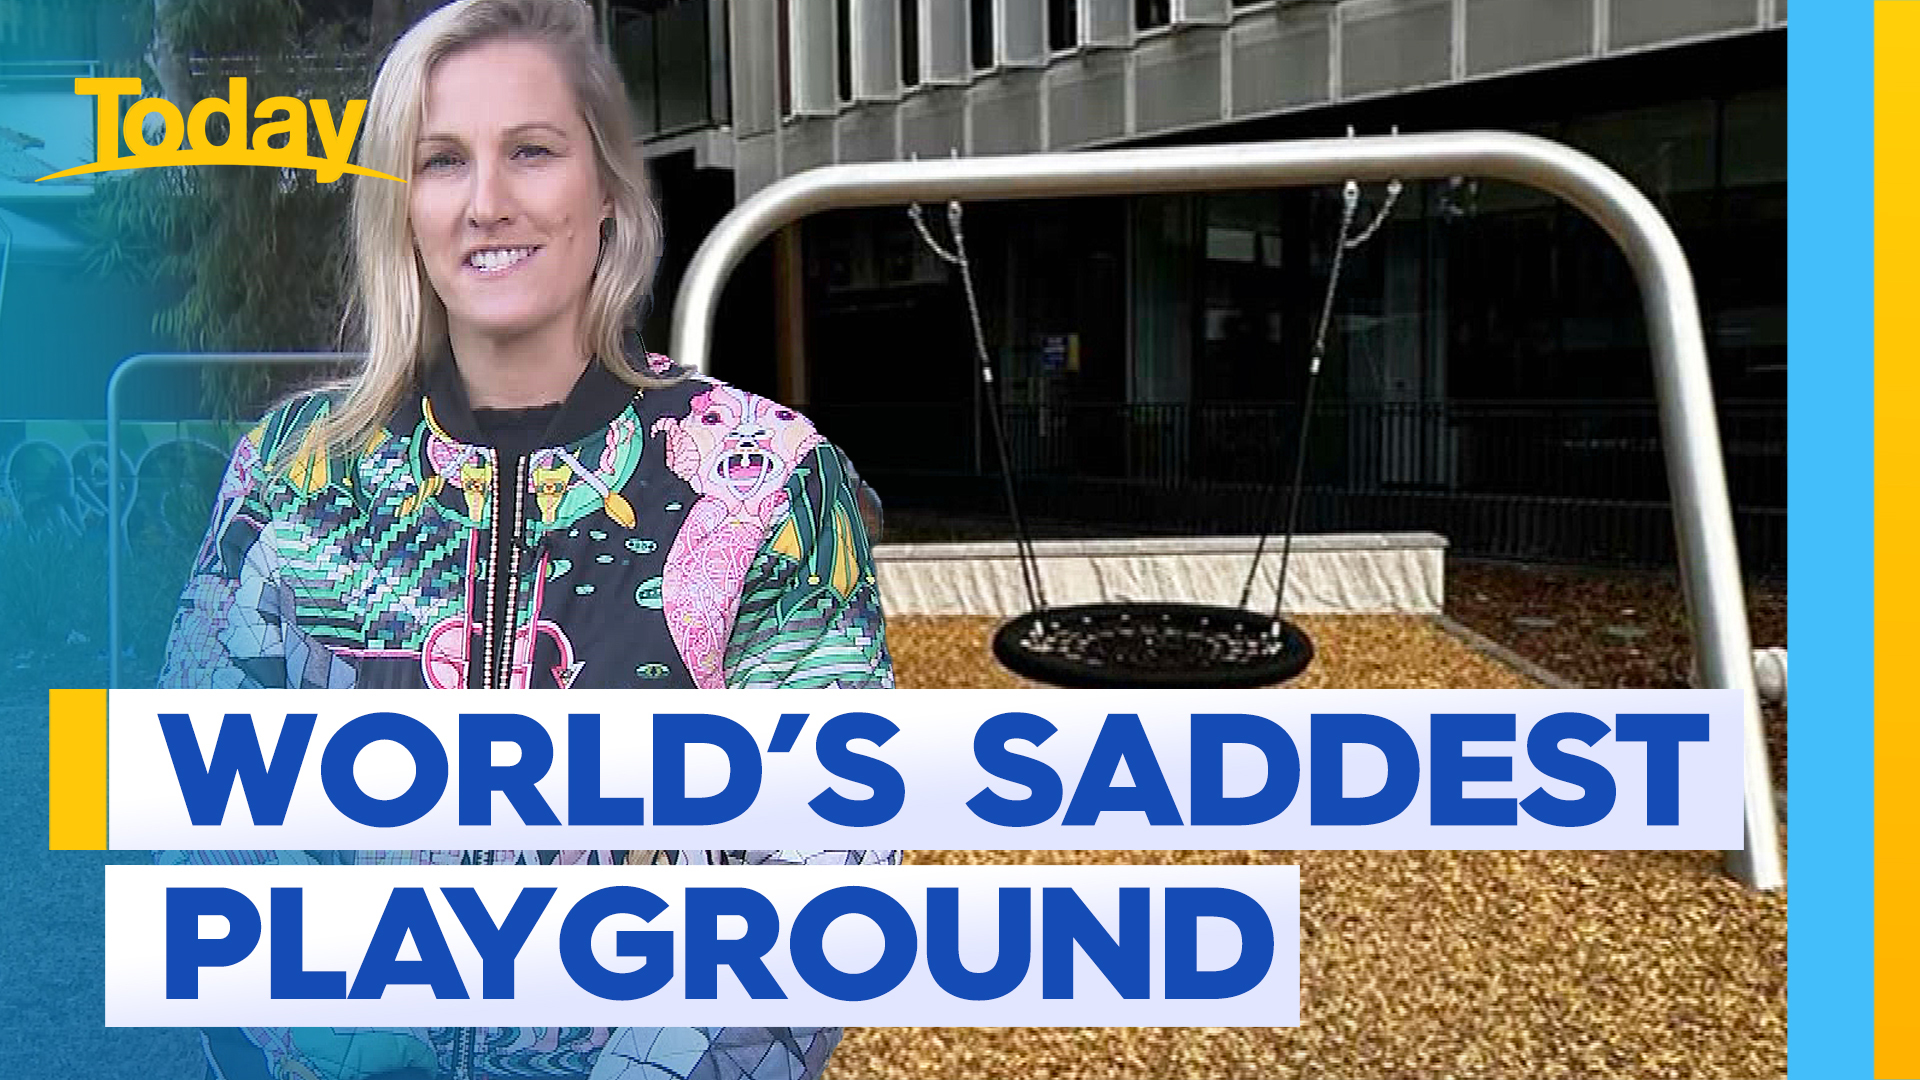 Council set to vote on fate of 'Melbourne's saddest playground'